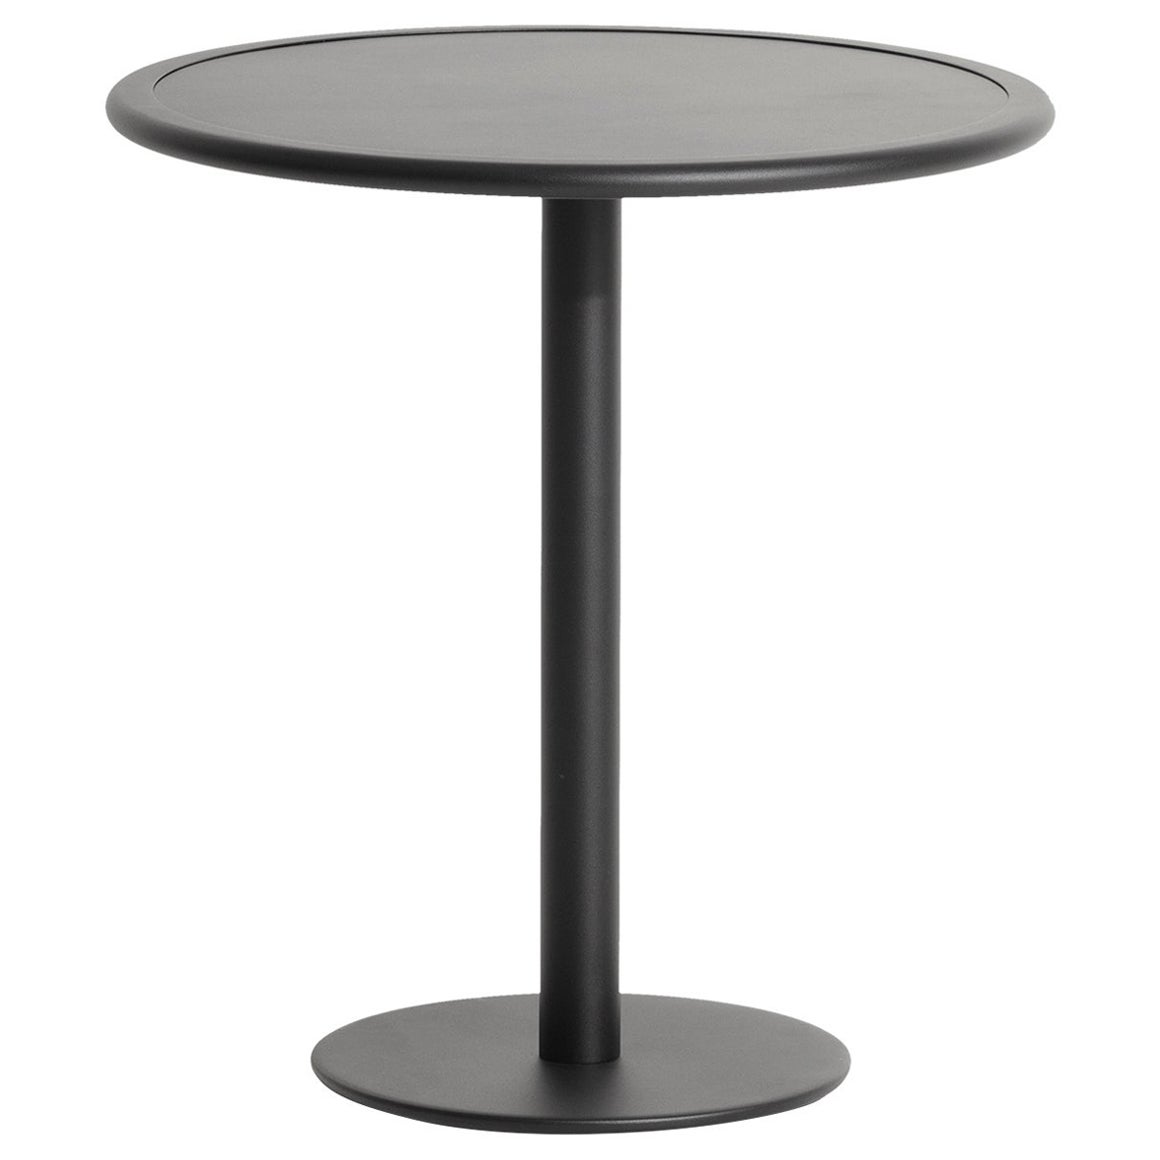 Petite Friture Week-End Bistro Round Dining Table in Black Aluminium, 2017 For Sale